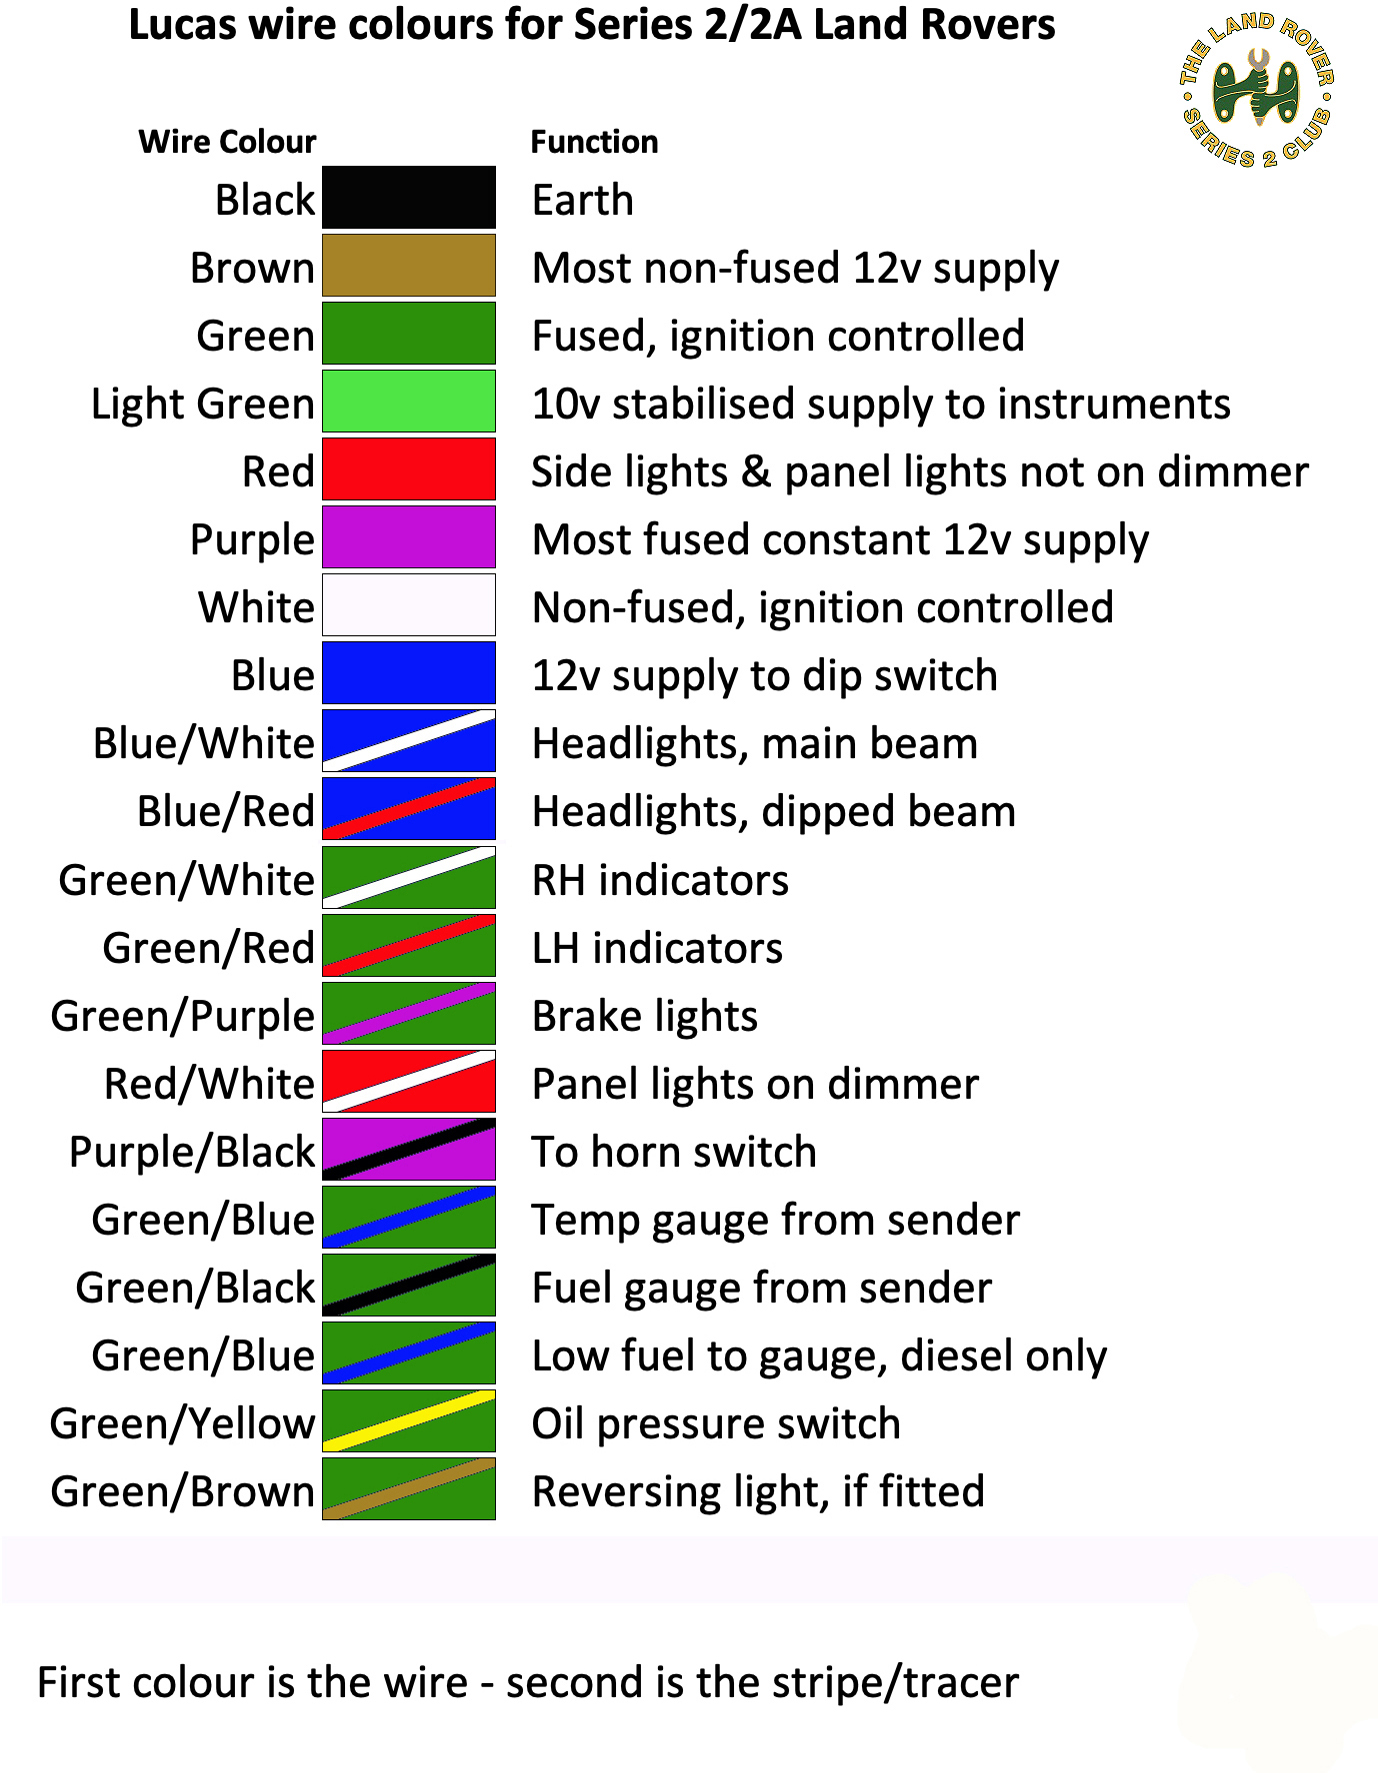 new_lucas_wire_colours